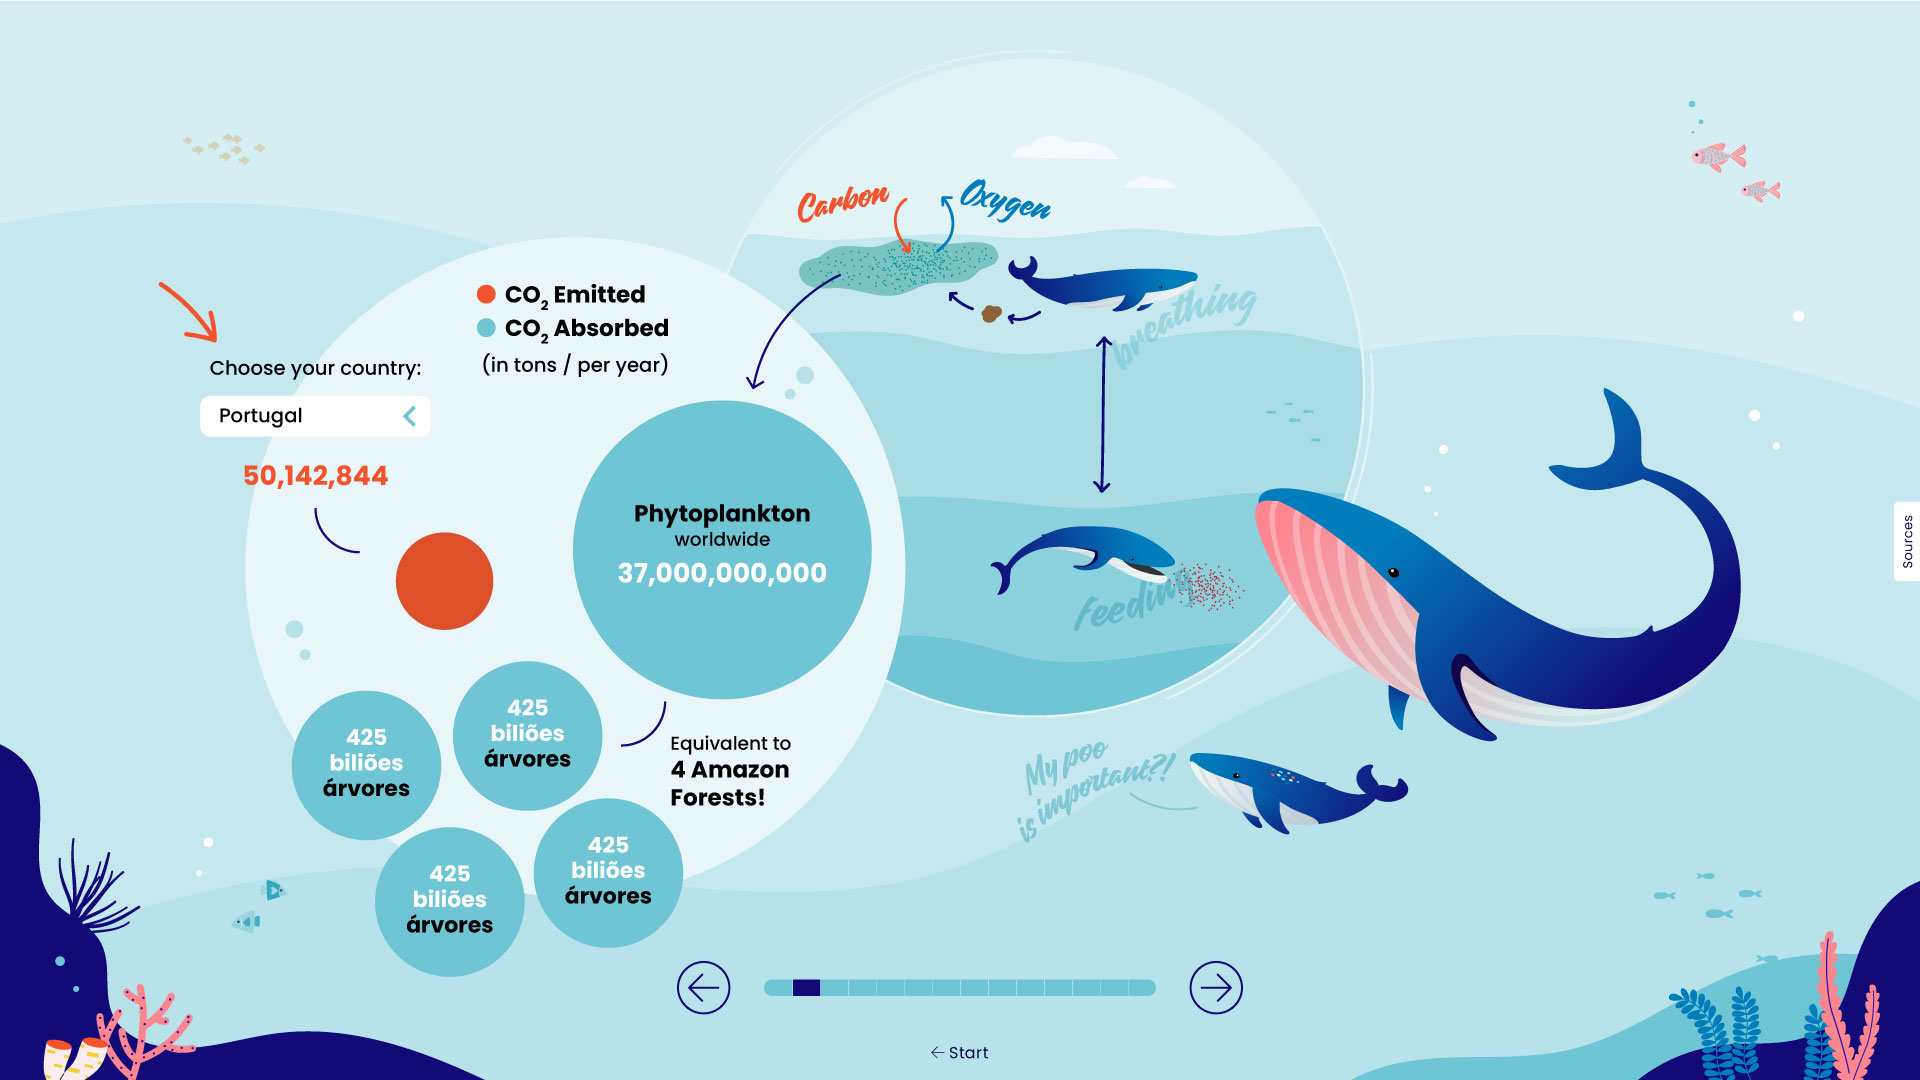 A screenshot from
							'Finding Arcadia'. At the left, there are some colorful whales and graphics depicting the byproducts of a whale feeding on plankton. At the right,
							there are bubbles showing the impact that phytoplankton have on absorbing CO2 from the atmosphere